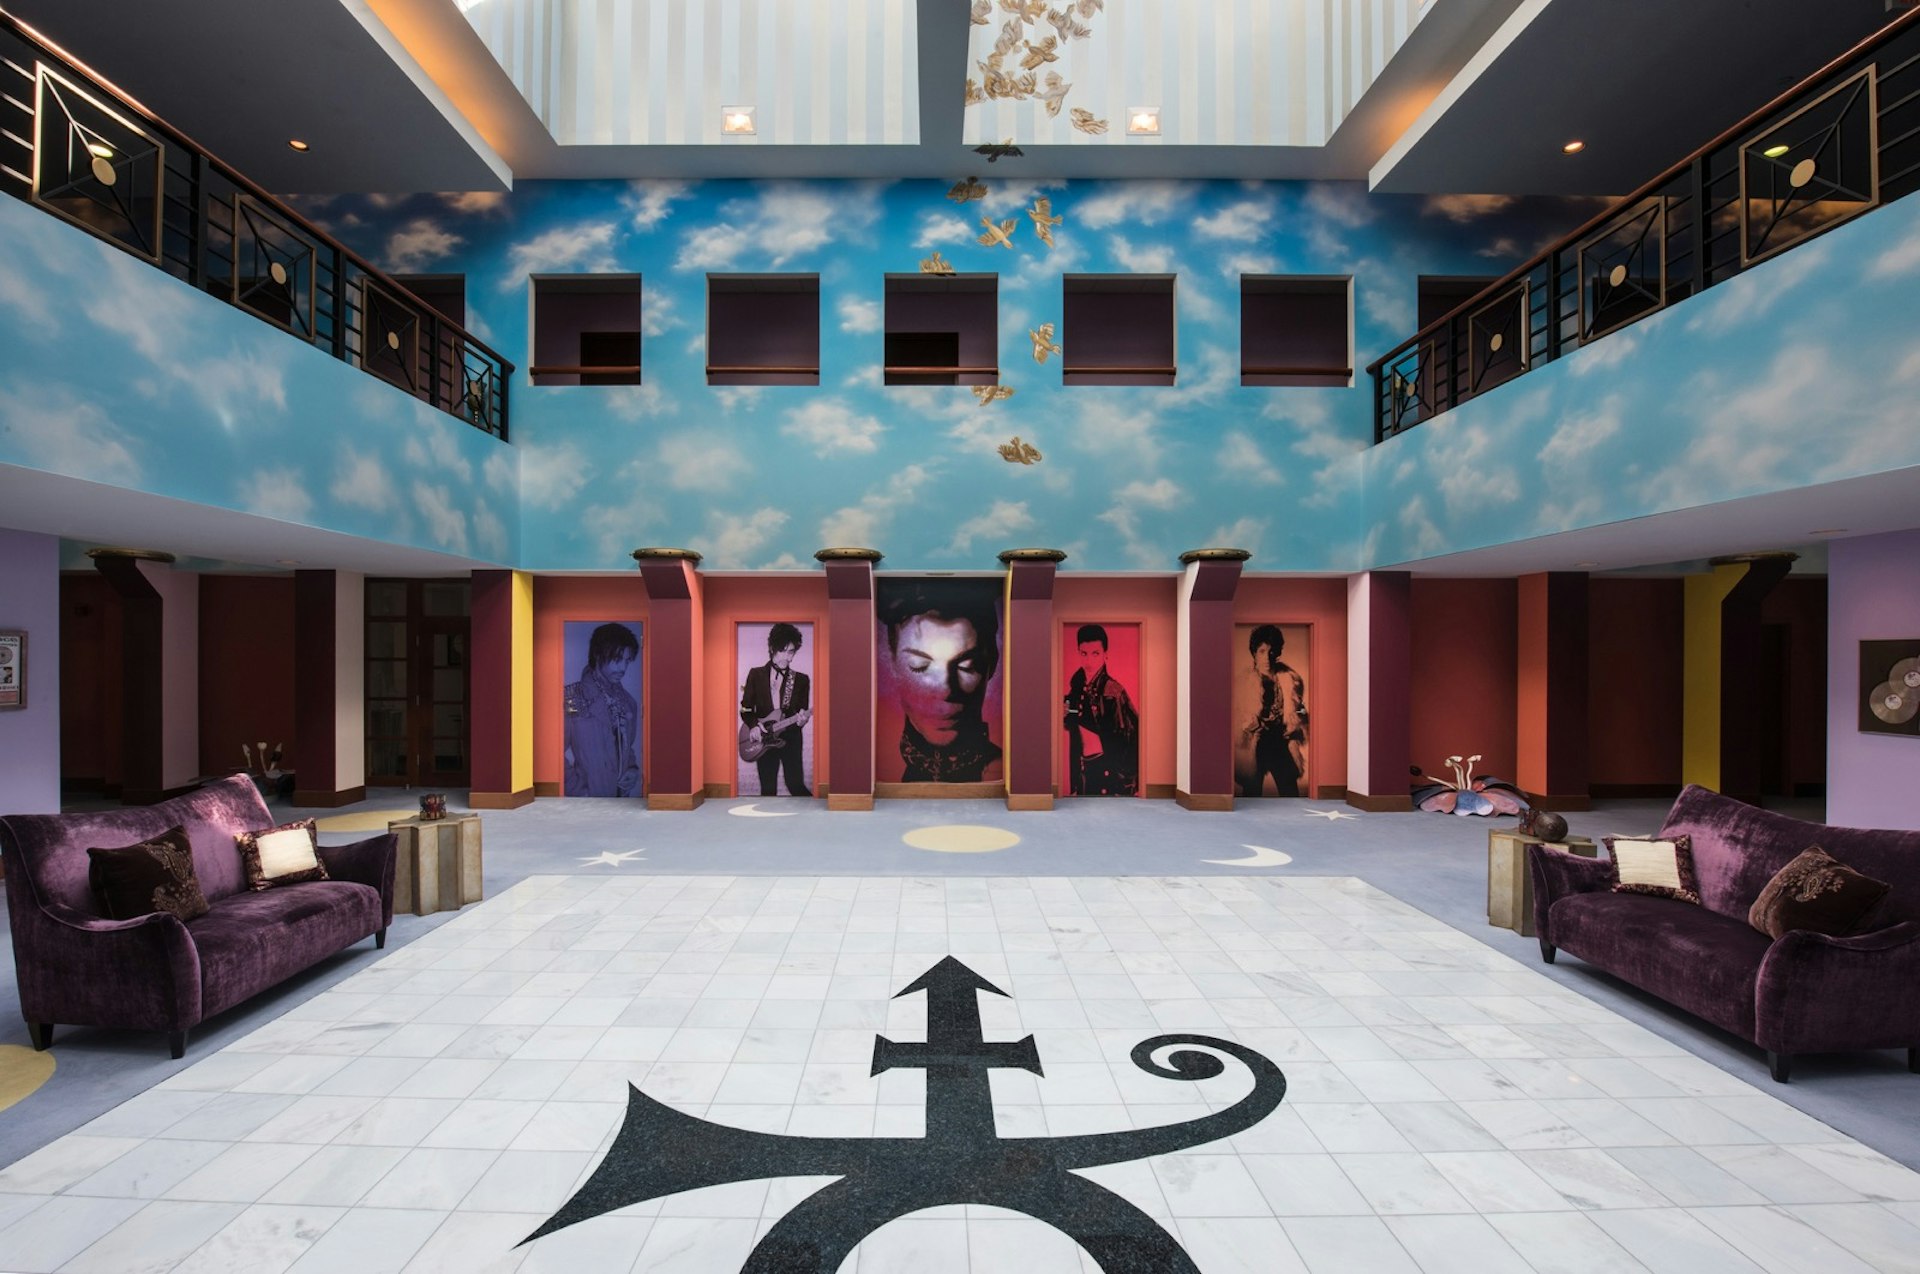 Prince's symbol is in the middle of a white floor in black, as images of the singer at various points in his career look out from cubbyholes in a sky-blue wall with clouds and two balconies on either side of the atrium